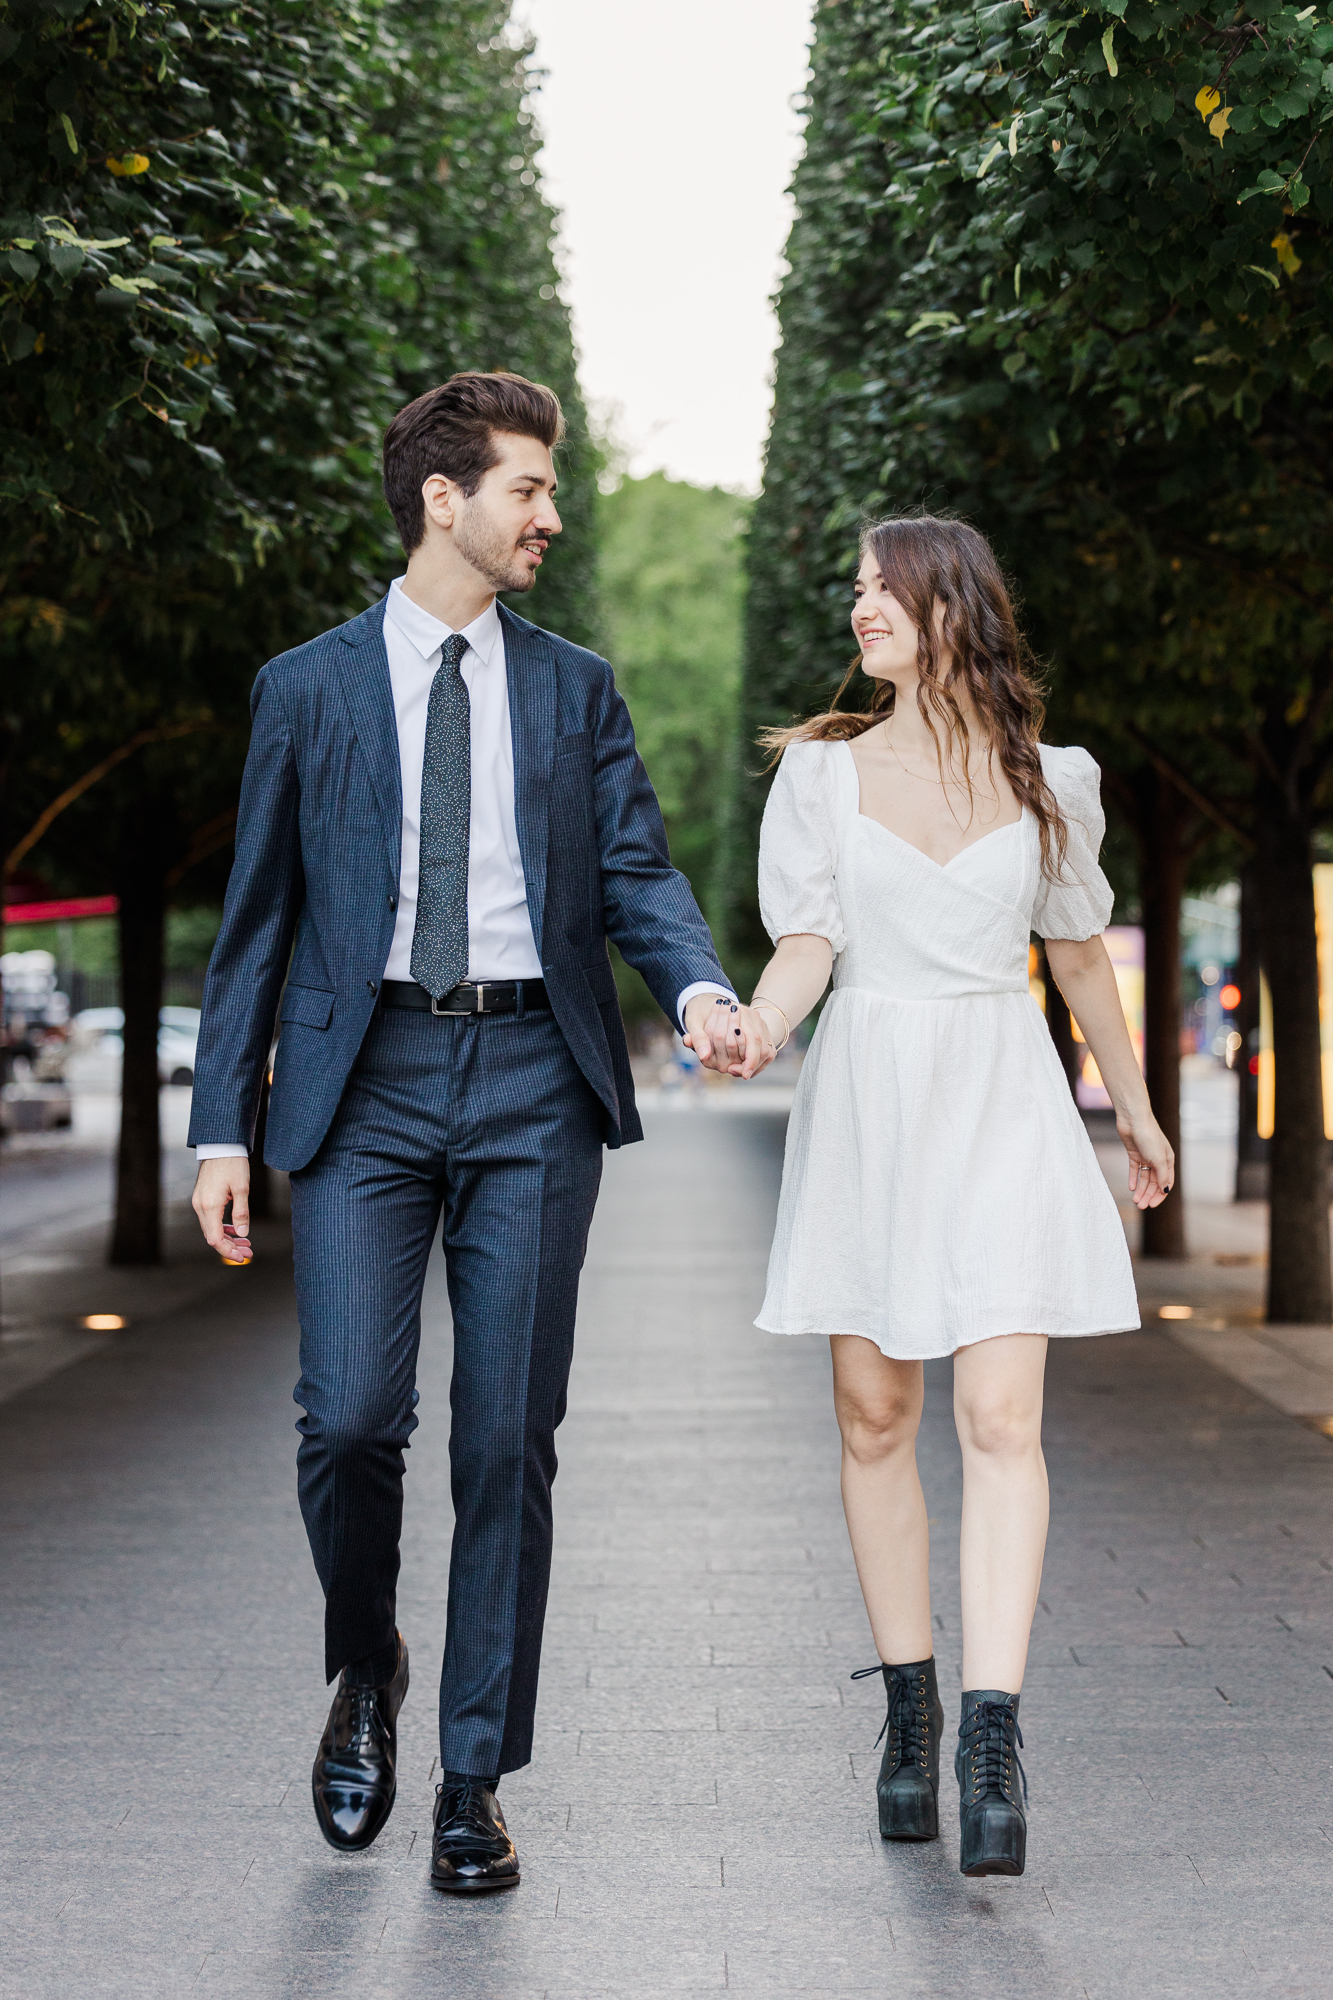 Radiant Central Park Engagement Photos in NYC